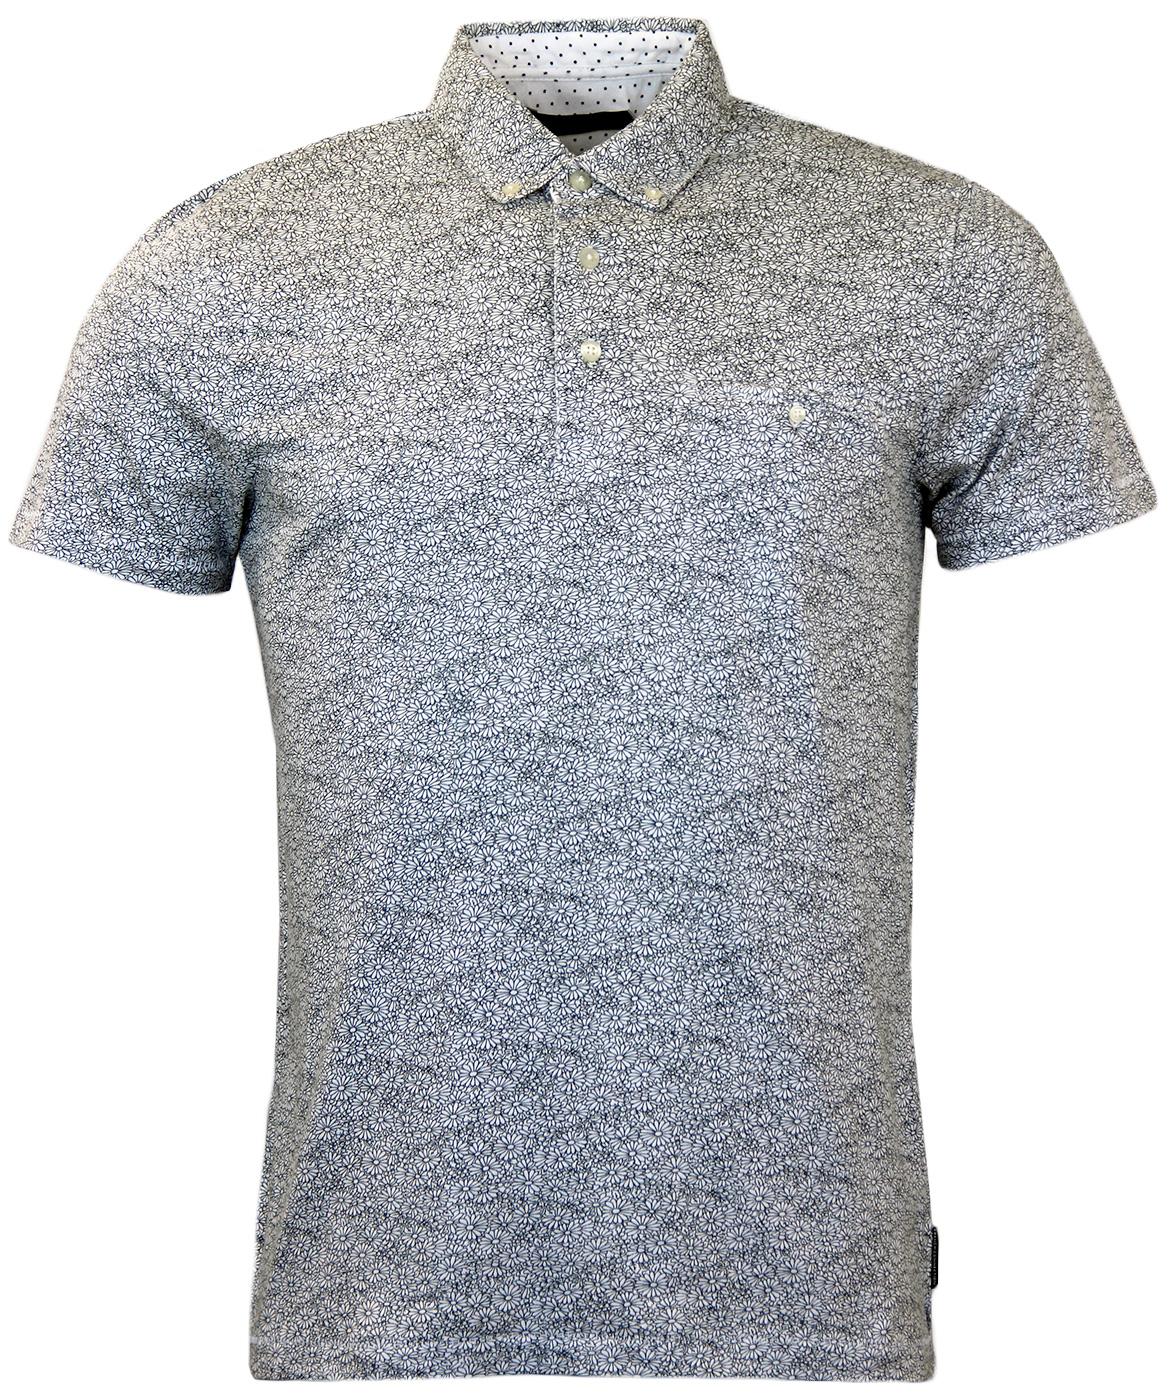 FRENCH CONNECTION Retro 70s Daisy Print Polo